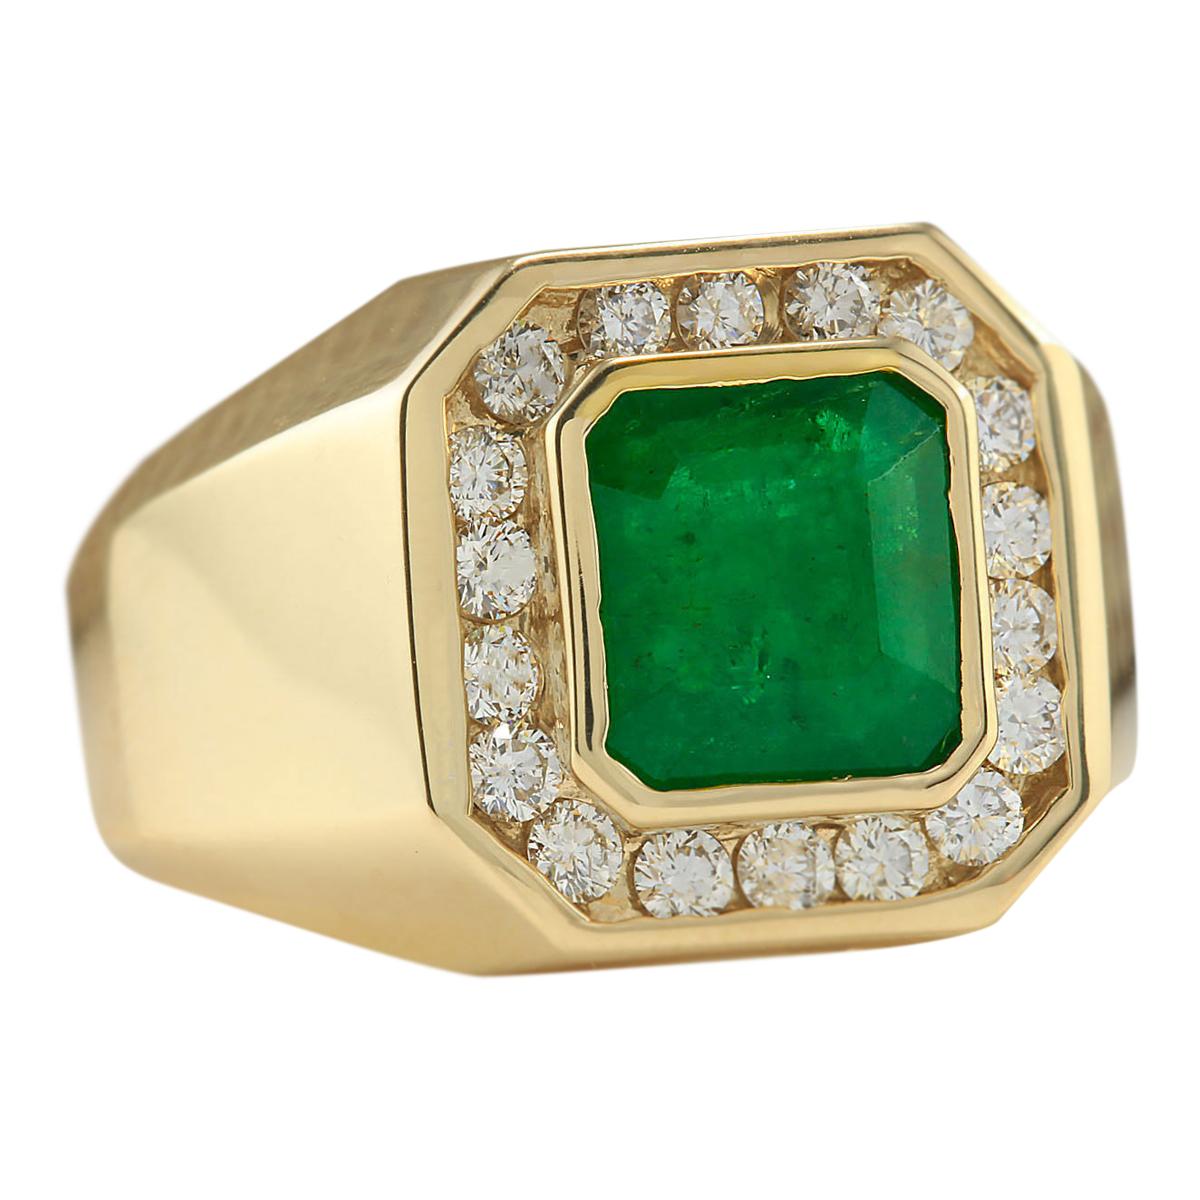 Indulge in timeless sophistication with this distinguished man's ring. Crafted in luxurious 14K yellow gold, the ring boasts a commanding 4.26 carat emerald as its centerpiece, measuring 10.00x10.00 mm. The emerald exudes a deep green hue, adding a